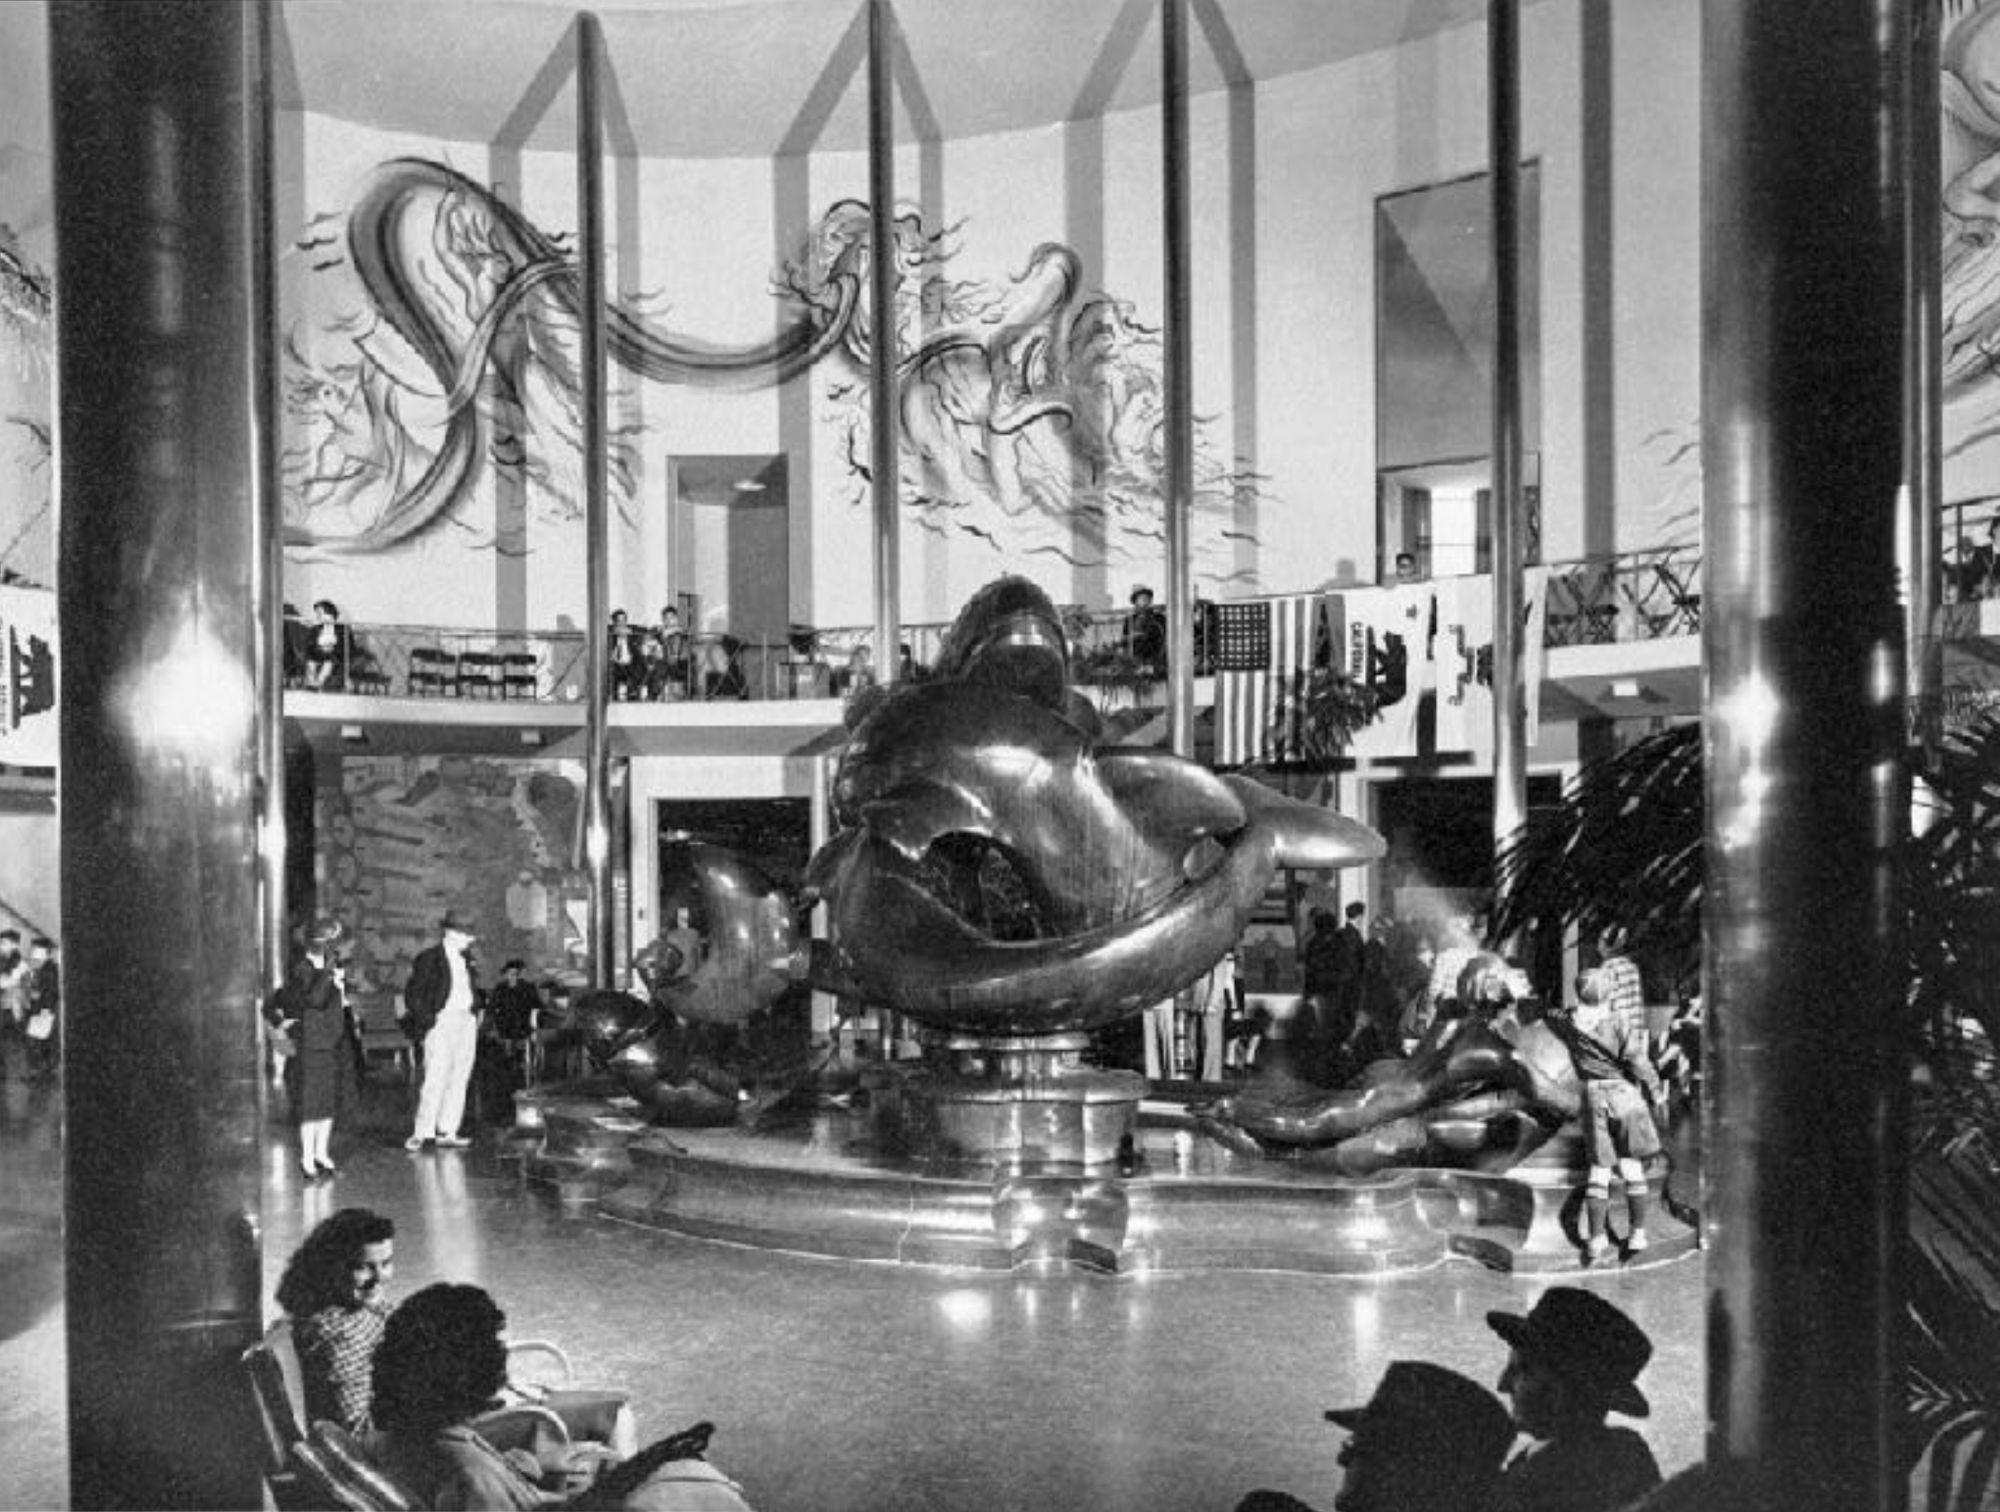 The Whales sculpture at the Golden Gate International Exposition